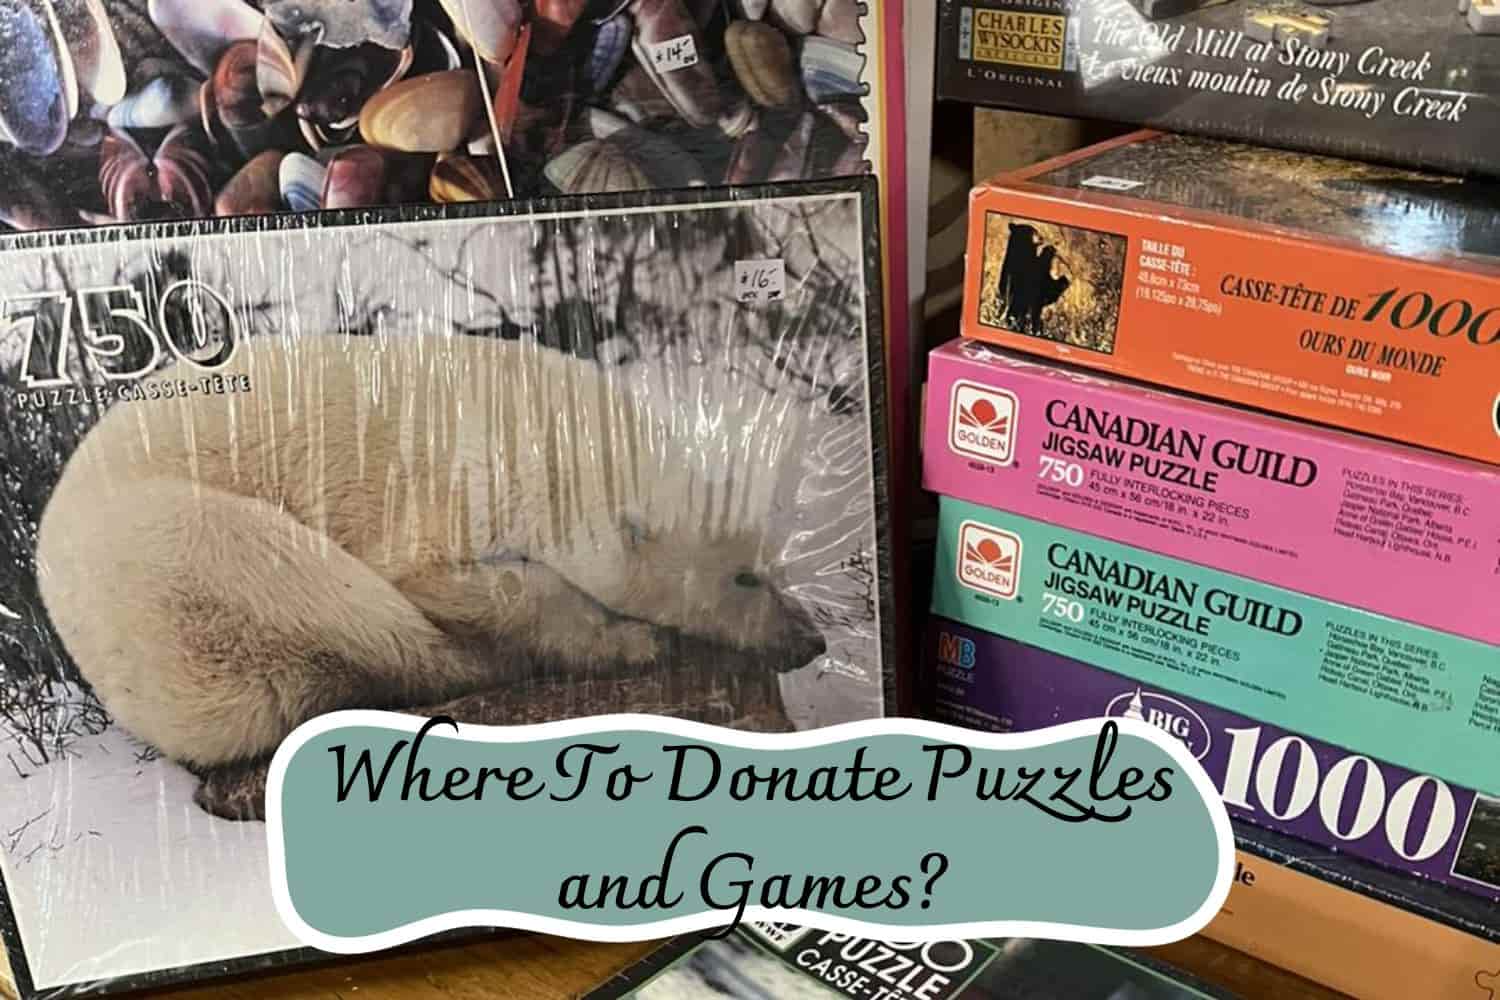 Where To Donate Puzzles and Games?